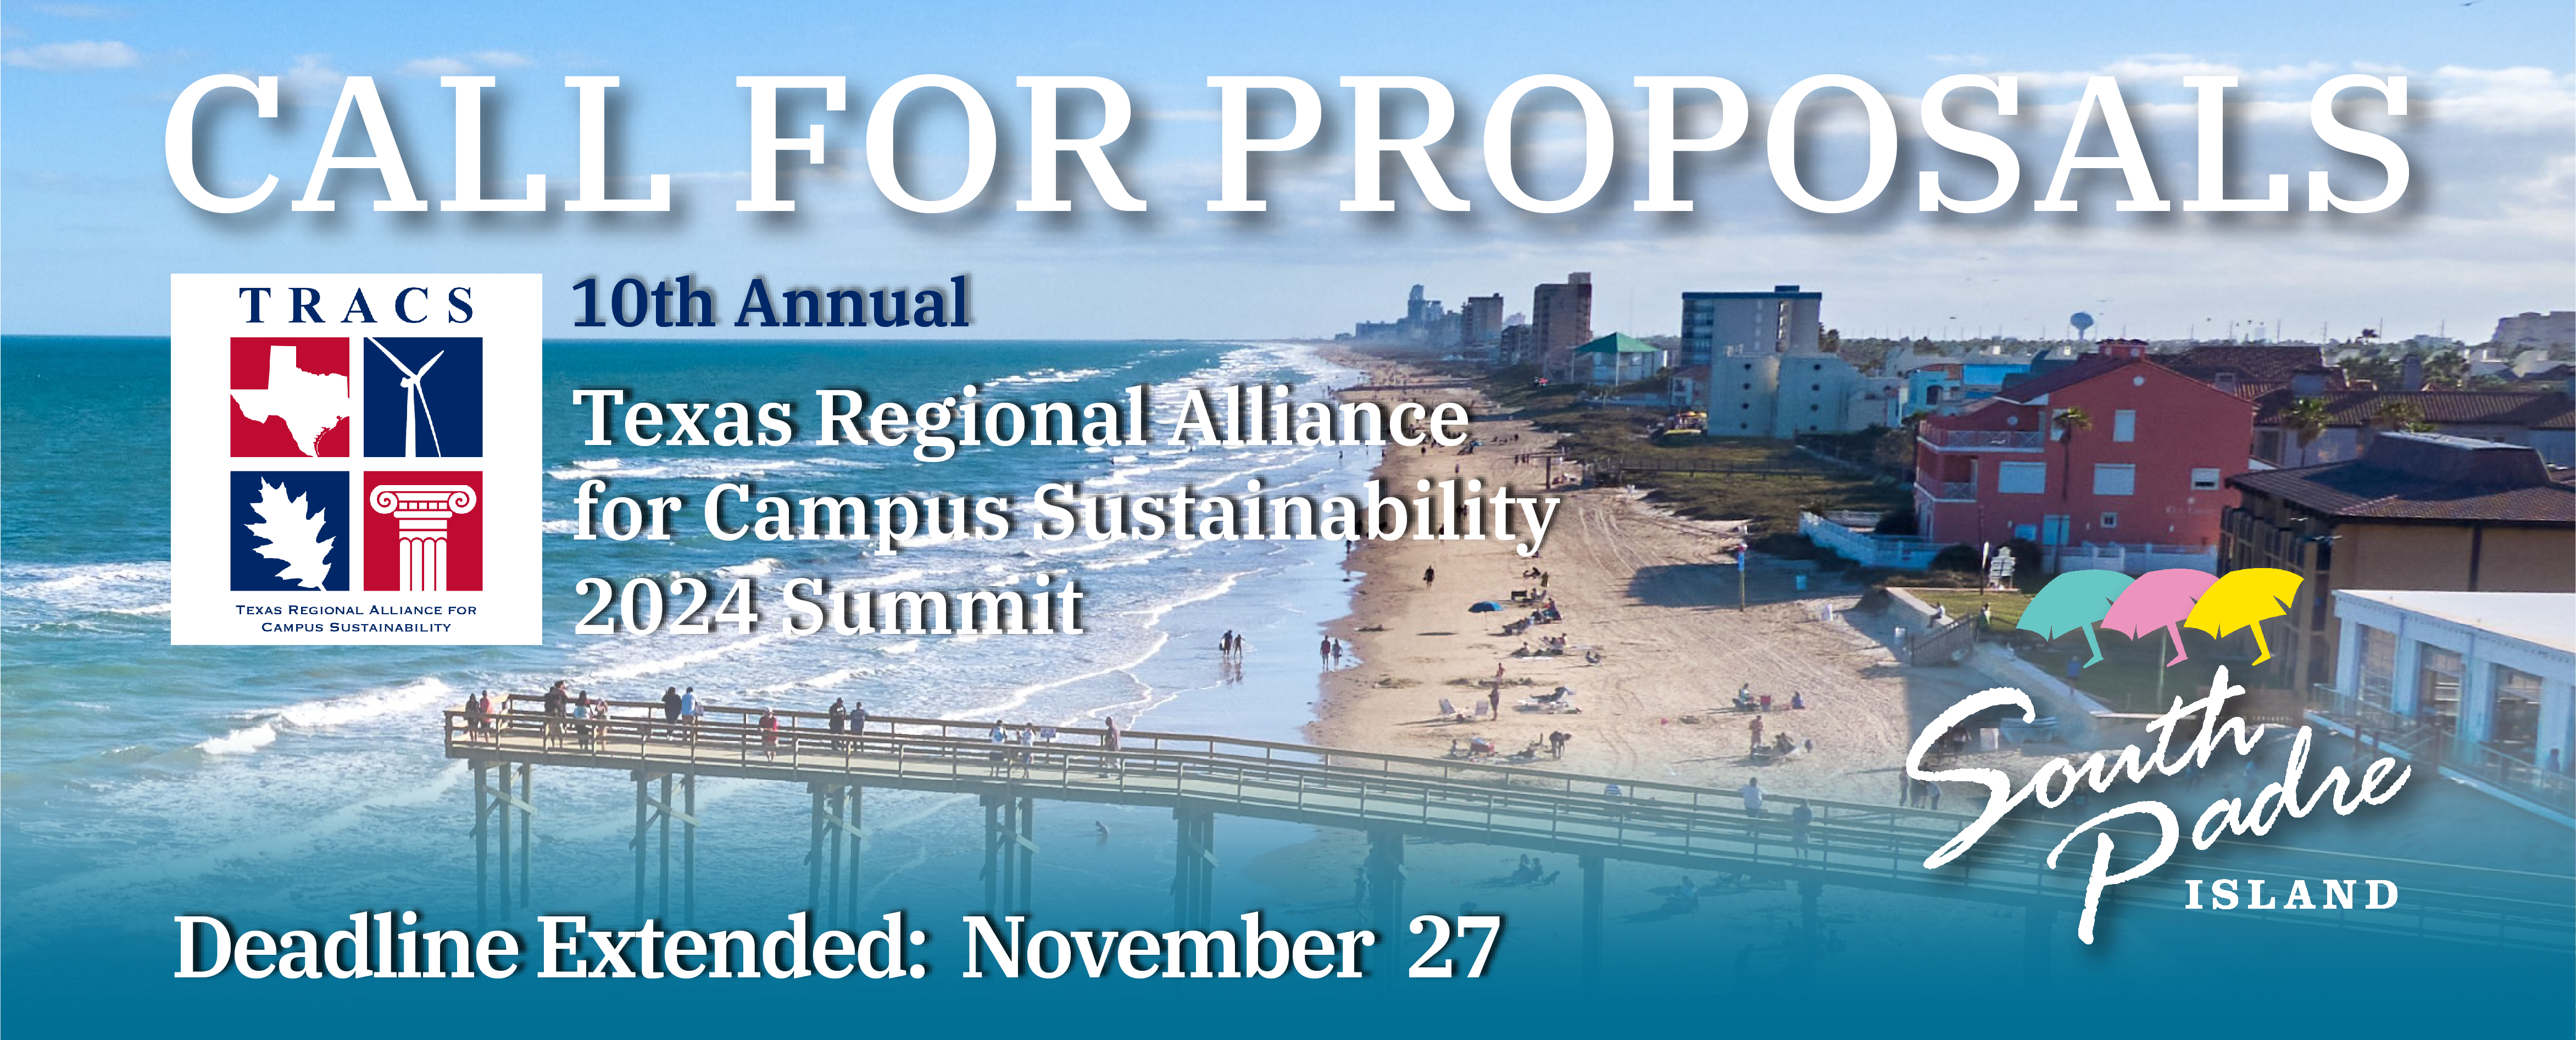 Call for Proposals 10th Annual Texas Regional Alliance for Campus Sustainability Deadline Extended to November 27